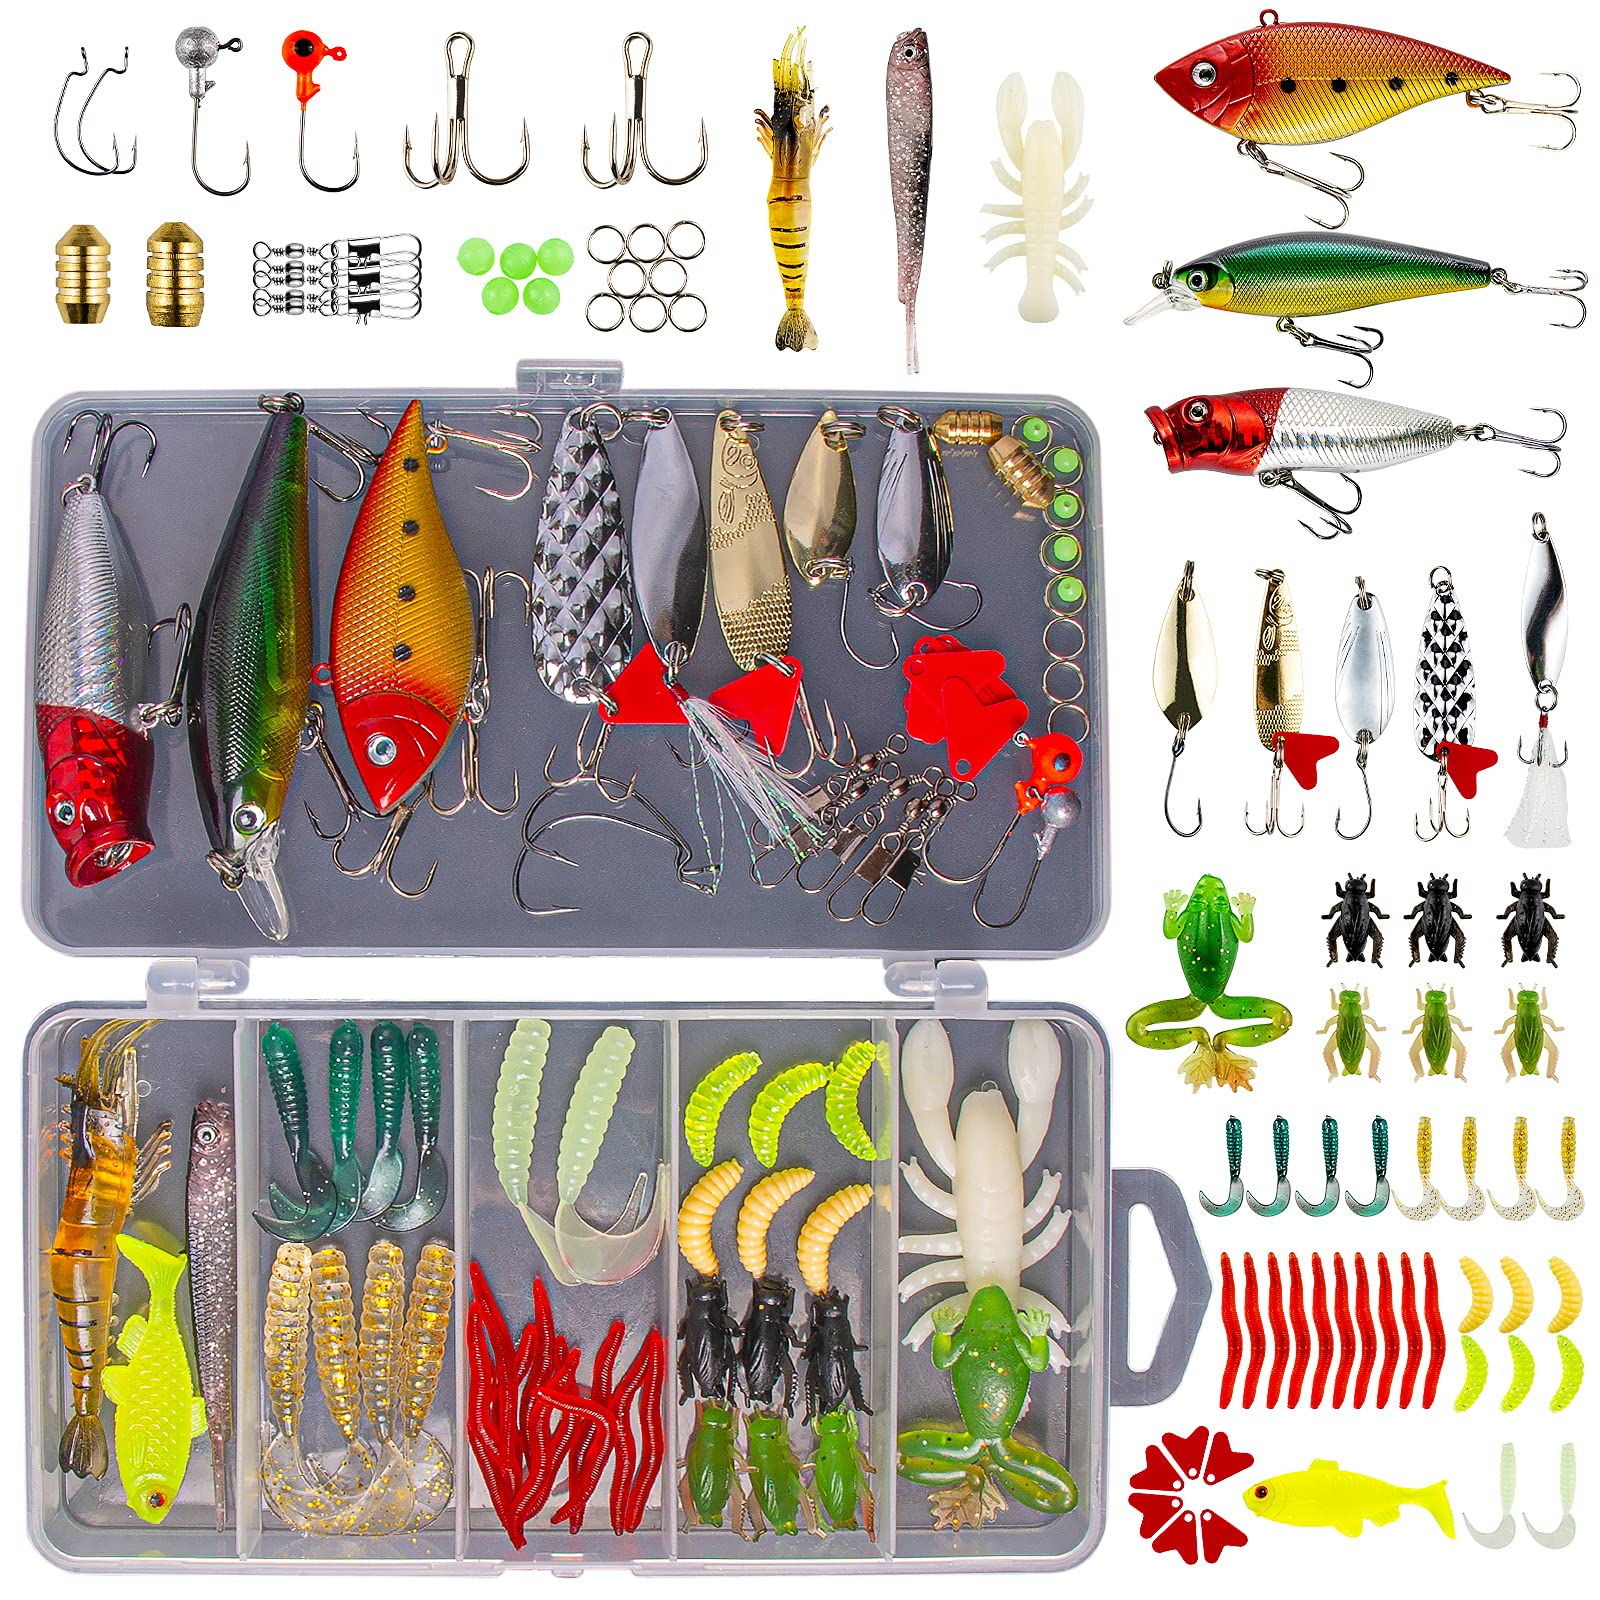  GOOHOCHY Fishing Tool 7pcs Fishing Suit Crappie Lures Fishing  Bait Trout Fishing Gear Fishing Lures Metal Fish Lure Squeeze- Out Fish  Hook Tools Swim Bait Sea ​​Fishing Plastic Extractor 